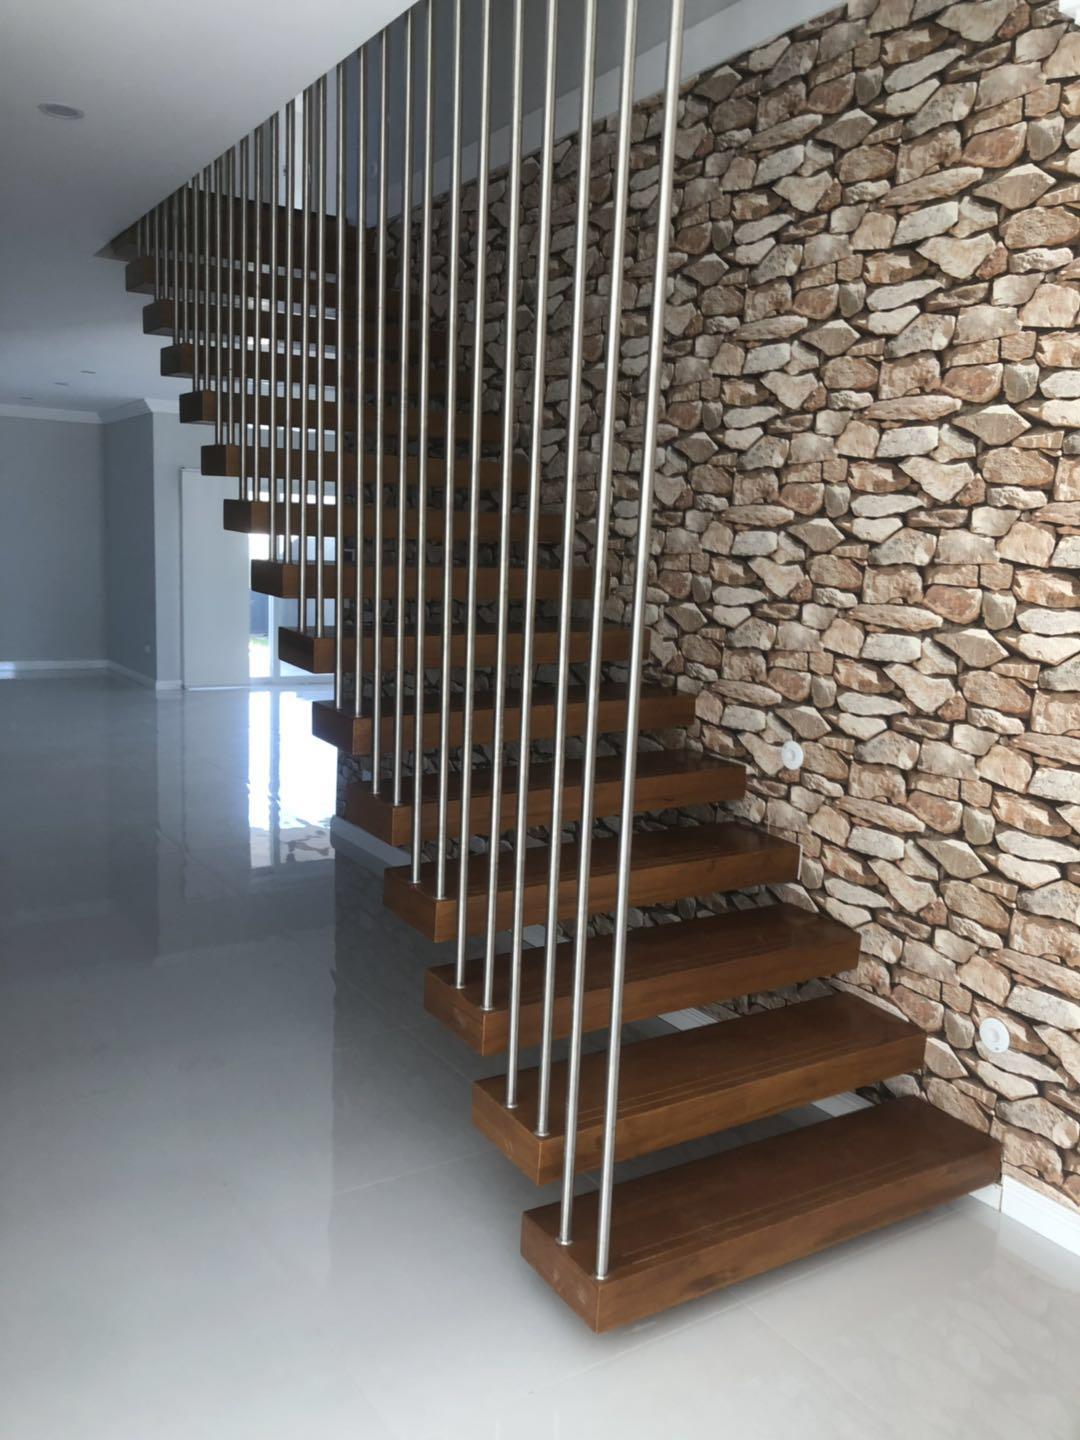 YUDI Stairs Professional floating staircase prices suppliers for hotel